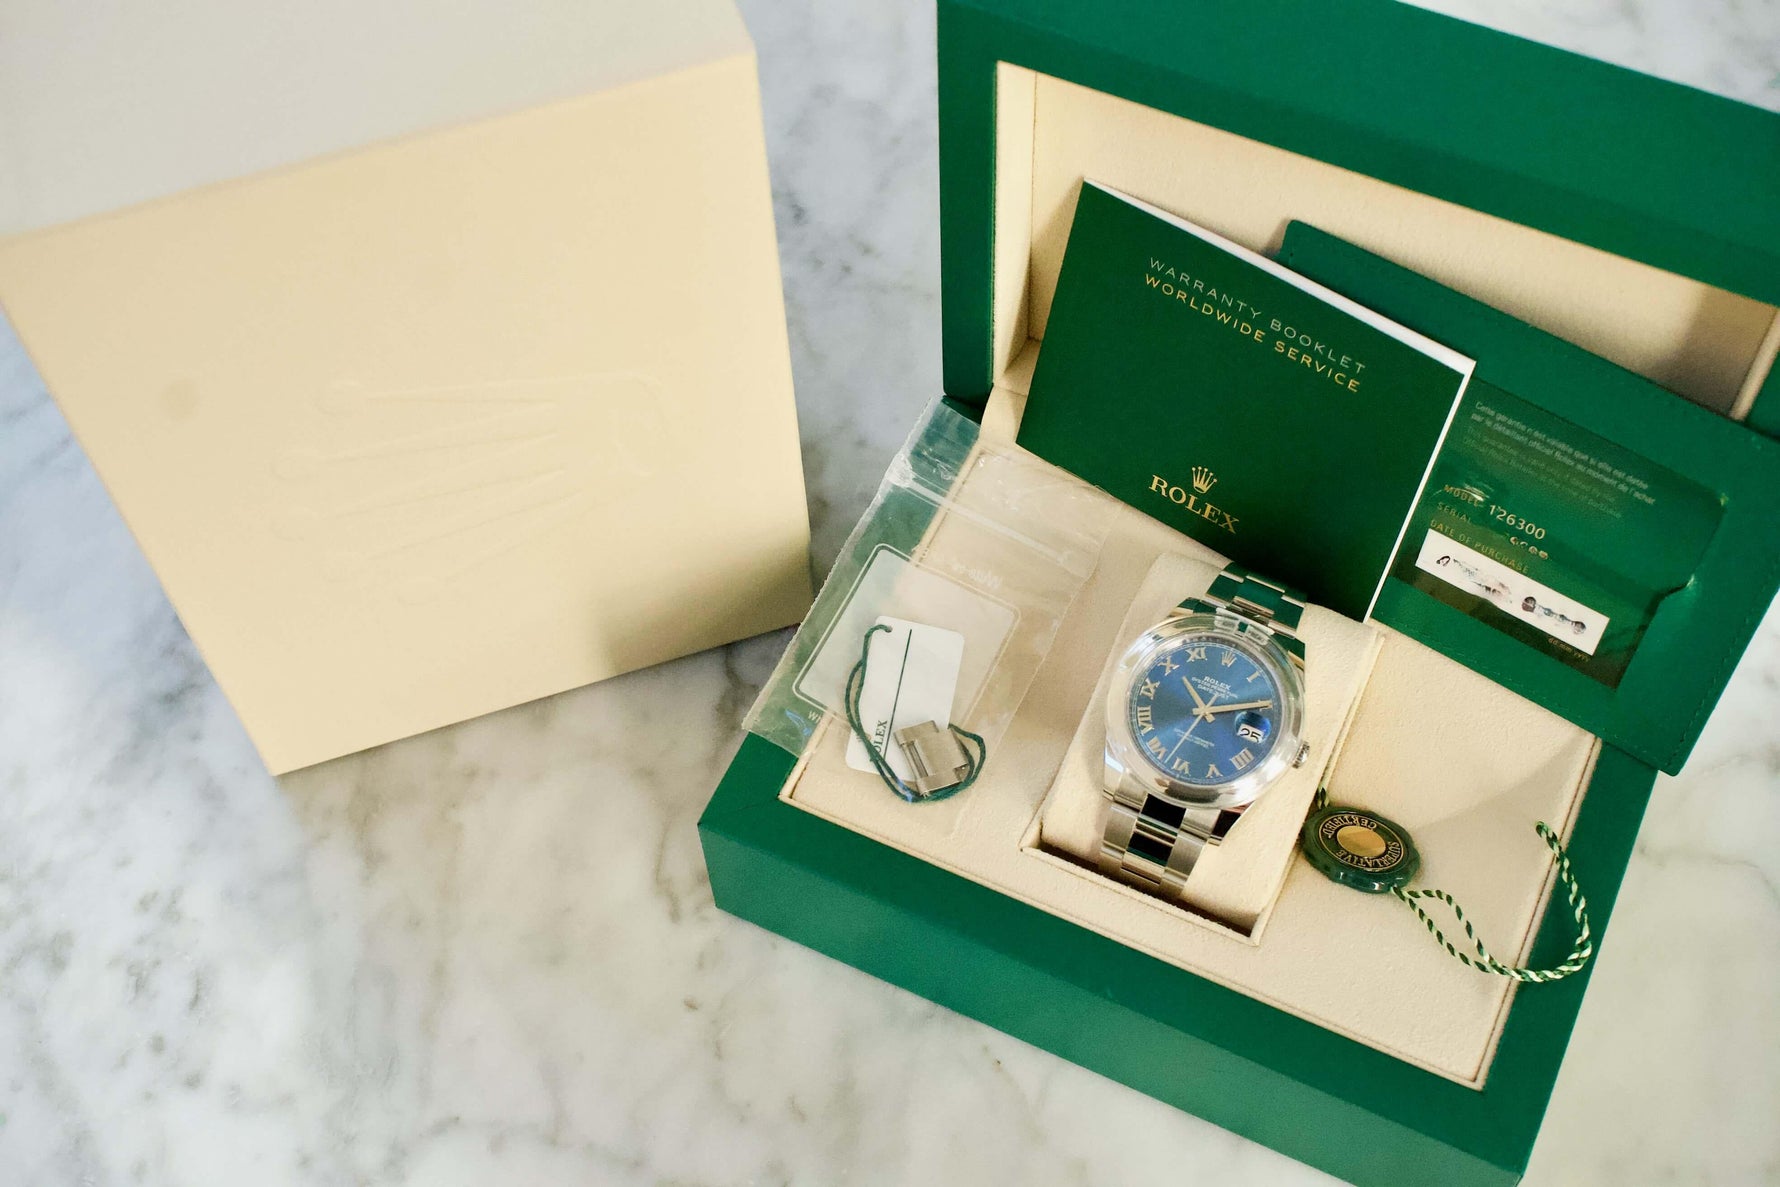 SOLD OUT: Rolex 126300 Datejust 41mm 2022 Azzurro Blue Smooth Bezel Oyster Box and Papers Like New - WearingTime Luxury Watches